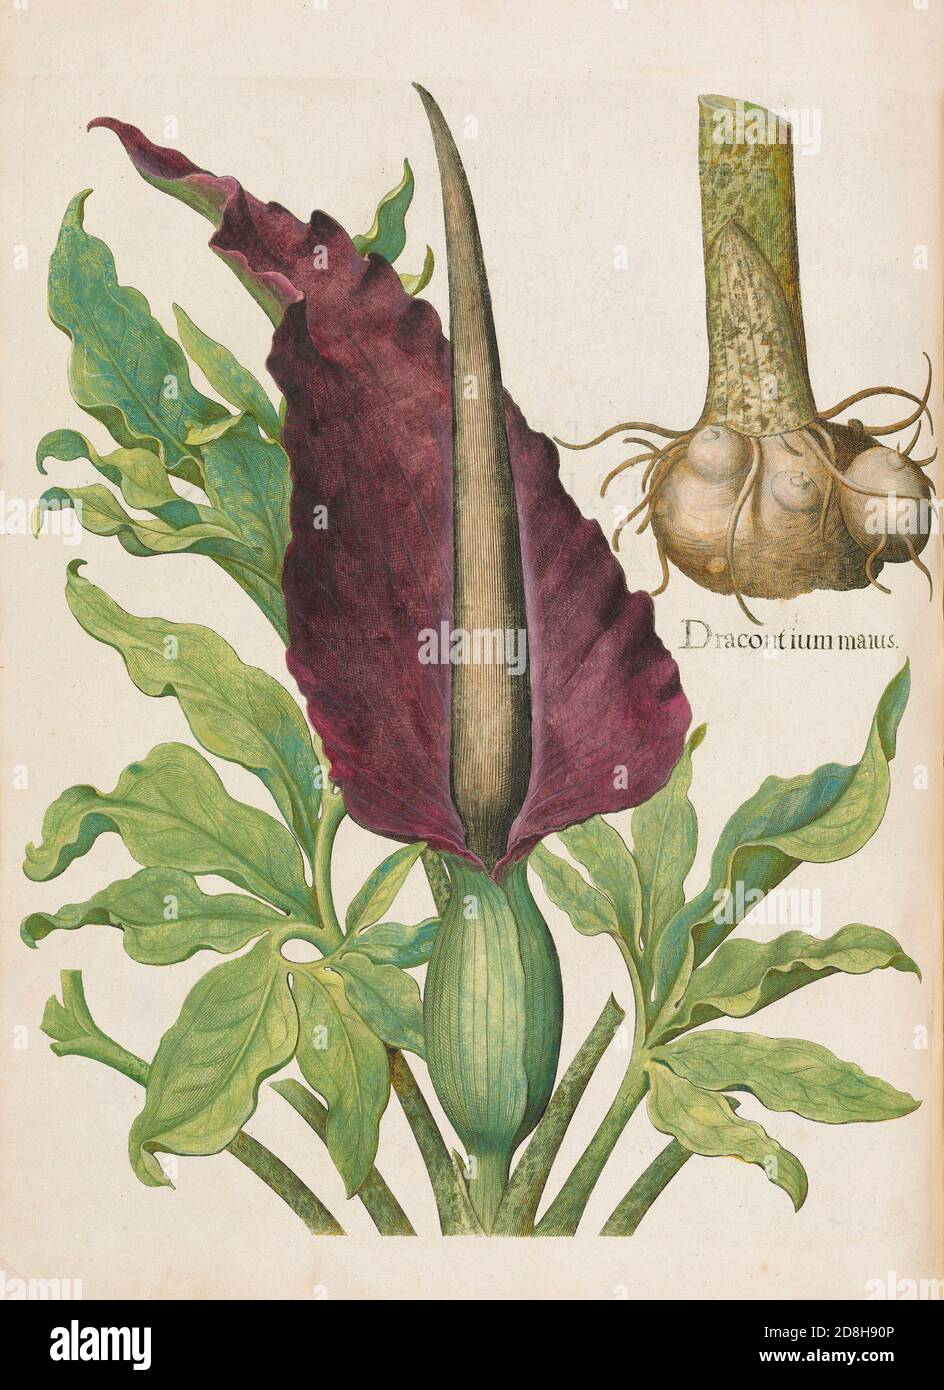 Dracontium Maius, botanical illustration by Basil Besler from the The Hortus Eystettensis, a codex produced by Basilius Besler in 1613. Stock Photo